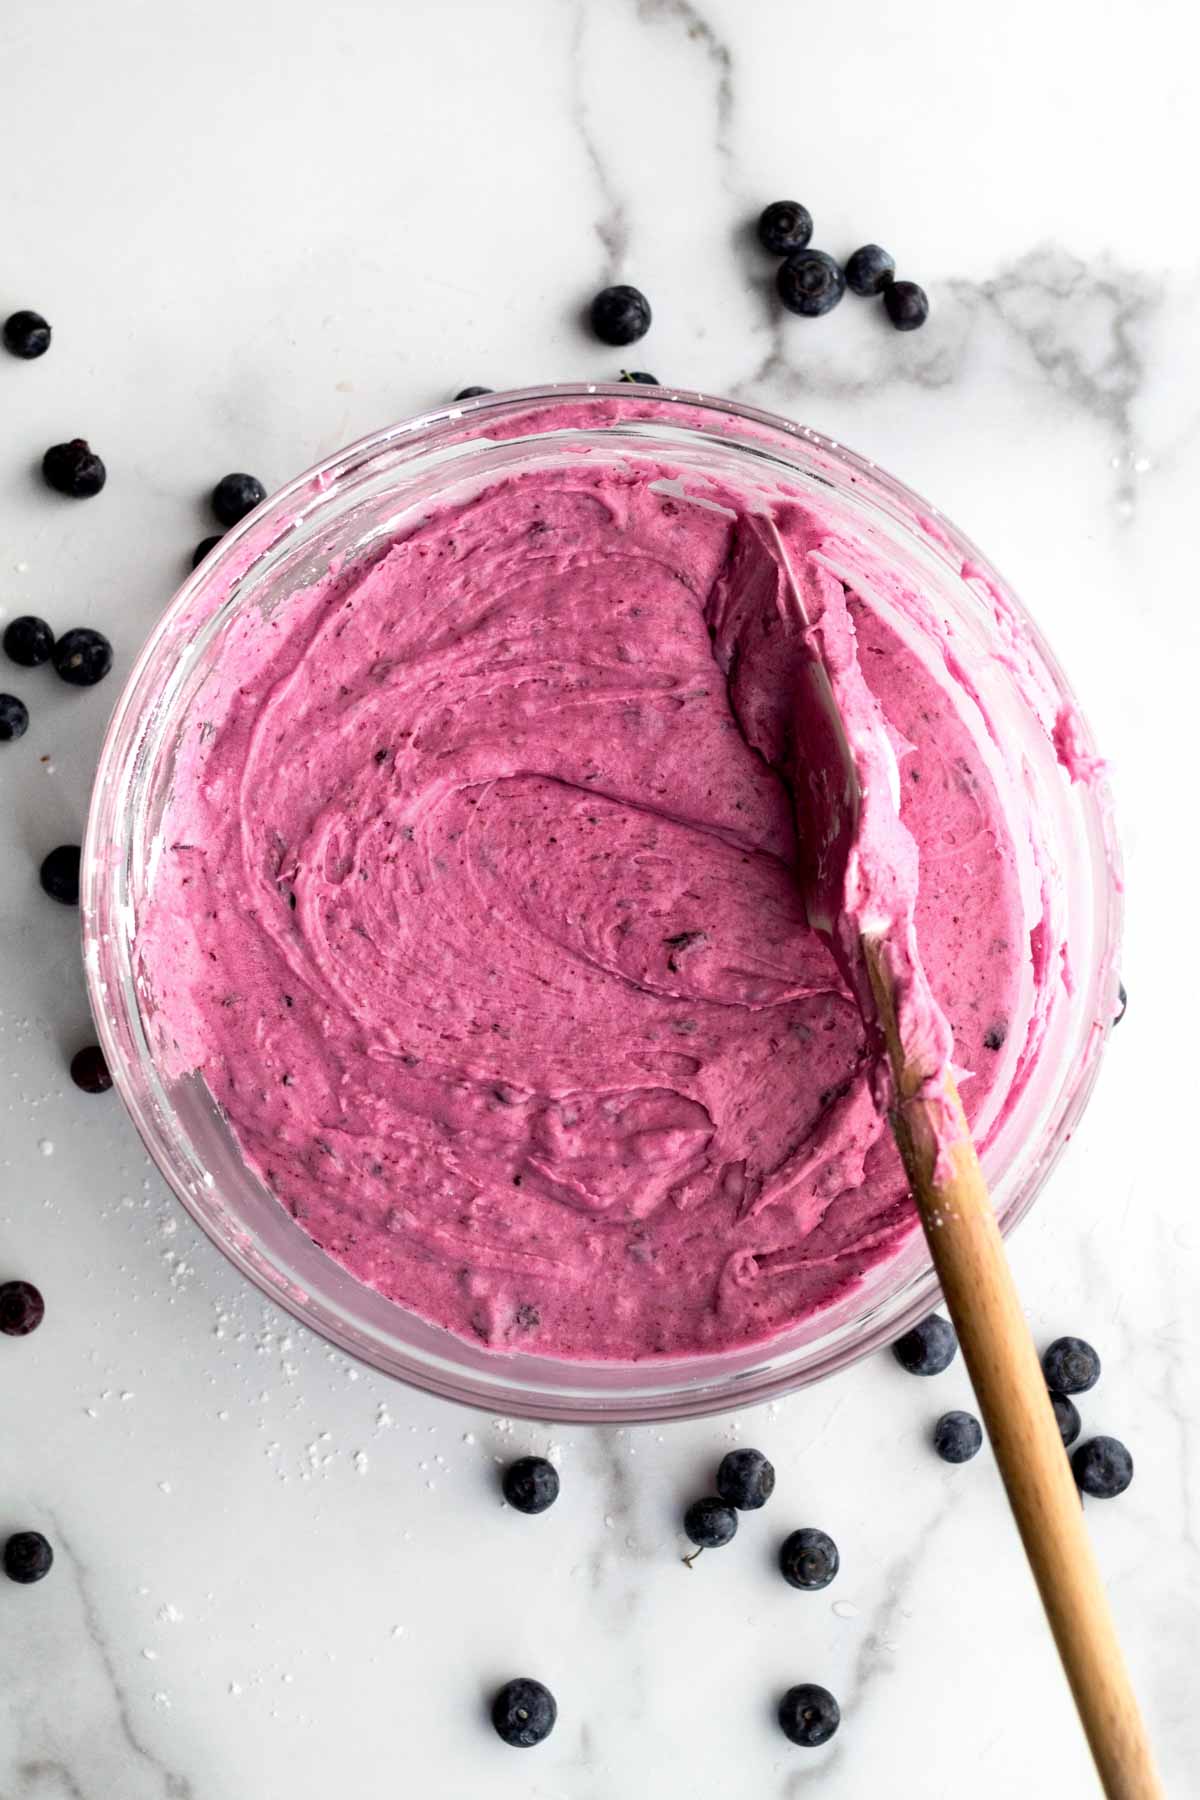 A bowl of creamy Blueberry frosting with a spatula.